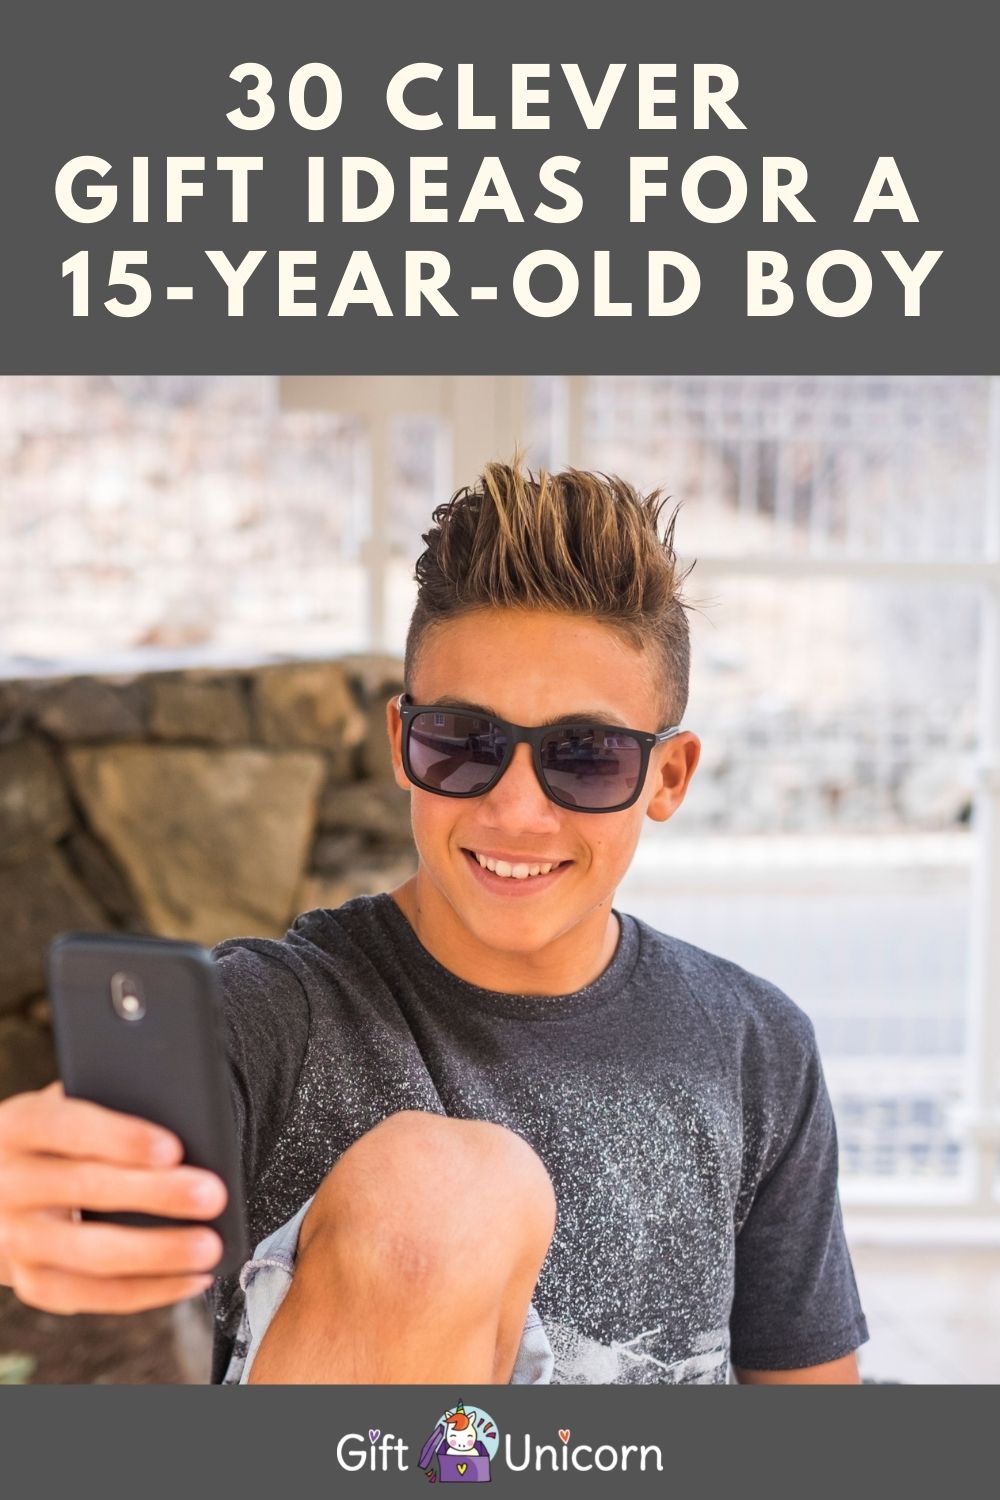 30 Clever Gift Ideas for a 15-Year-Old Boy - pinterest pin image